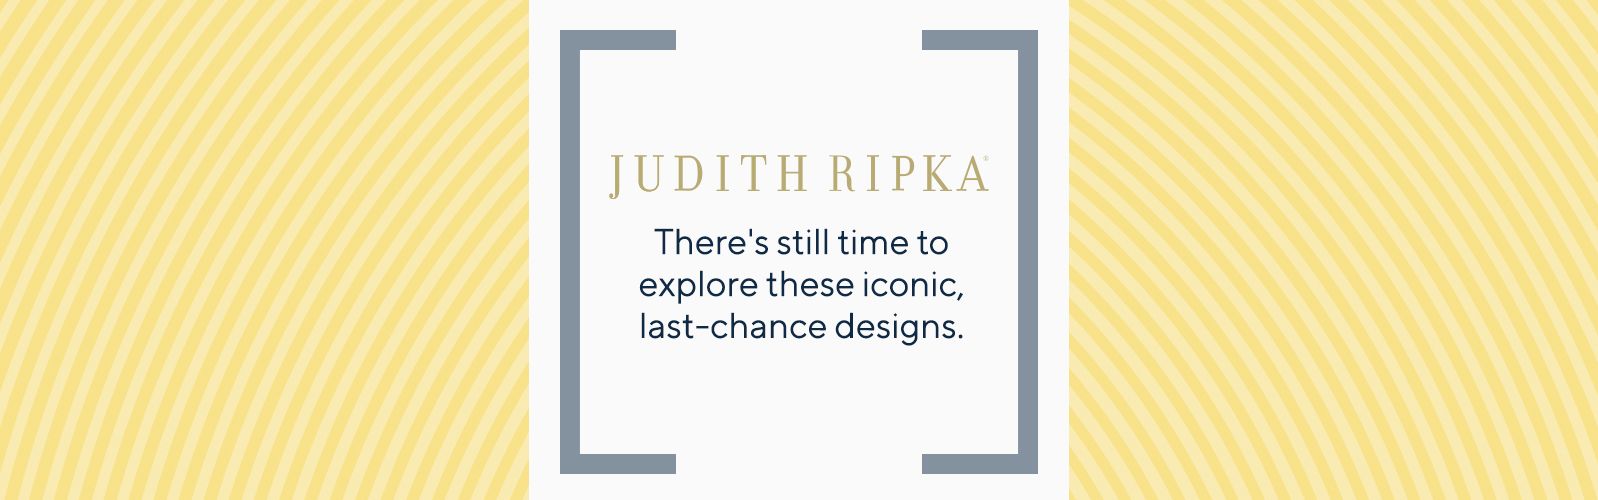 Judith Ripka - There's still time to explore these iconic, last-chance designs.